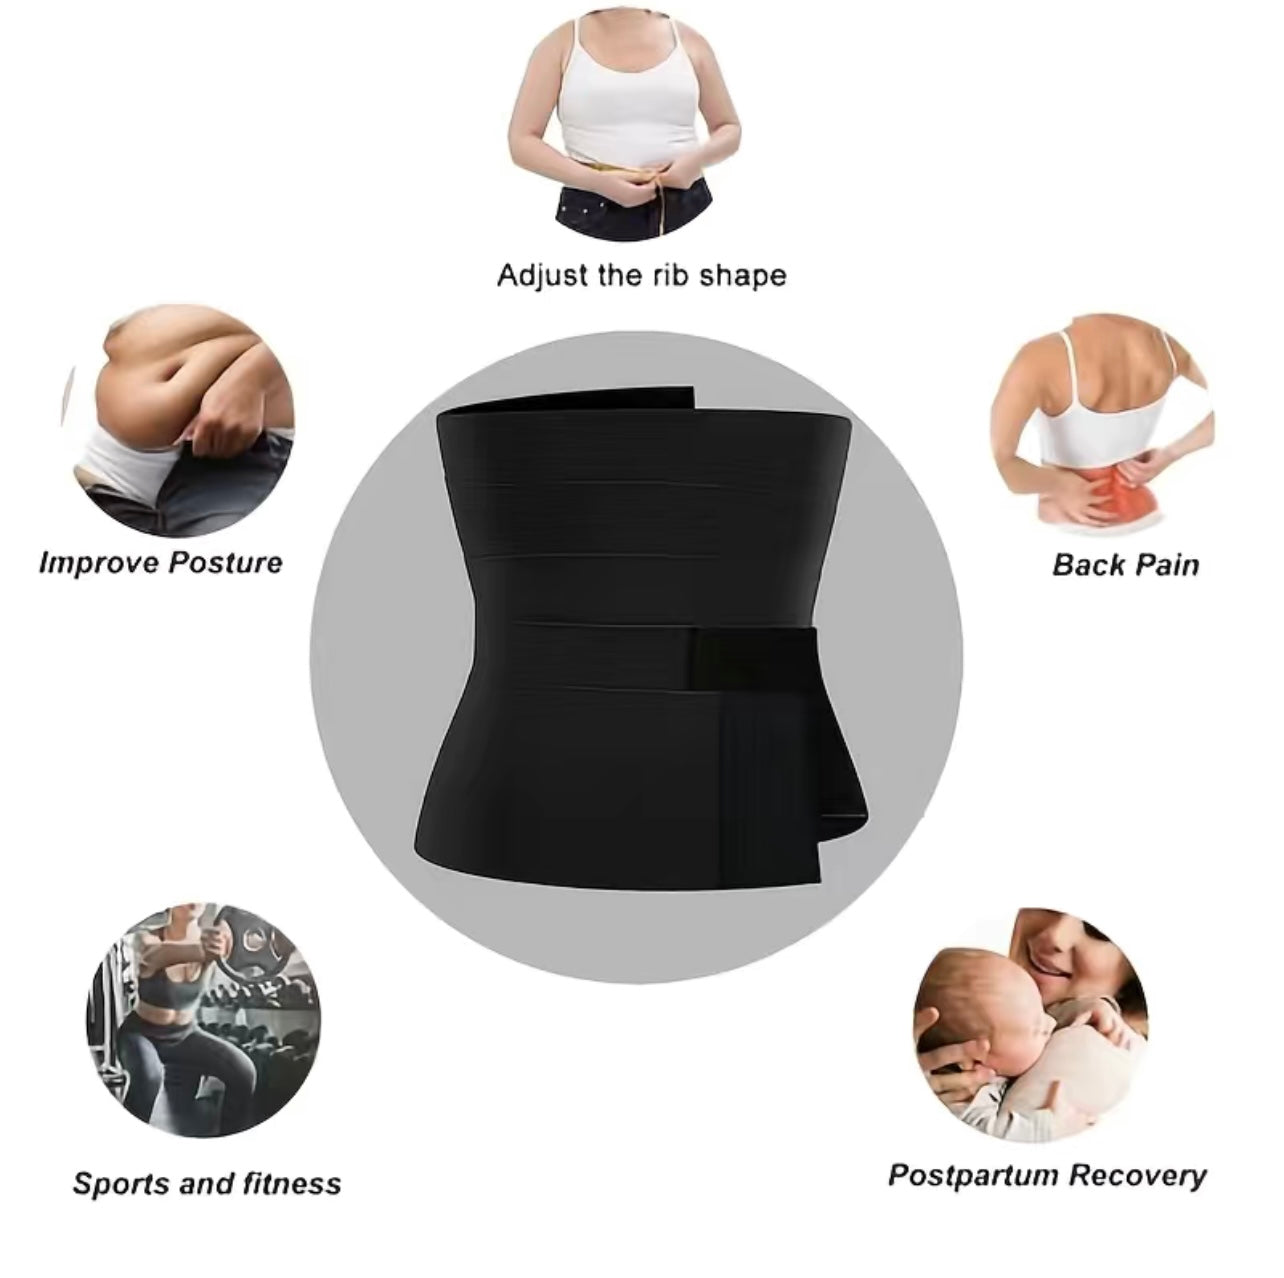 Can you wear your waist trainer under your clothes. #fyp #health #beau